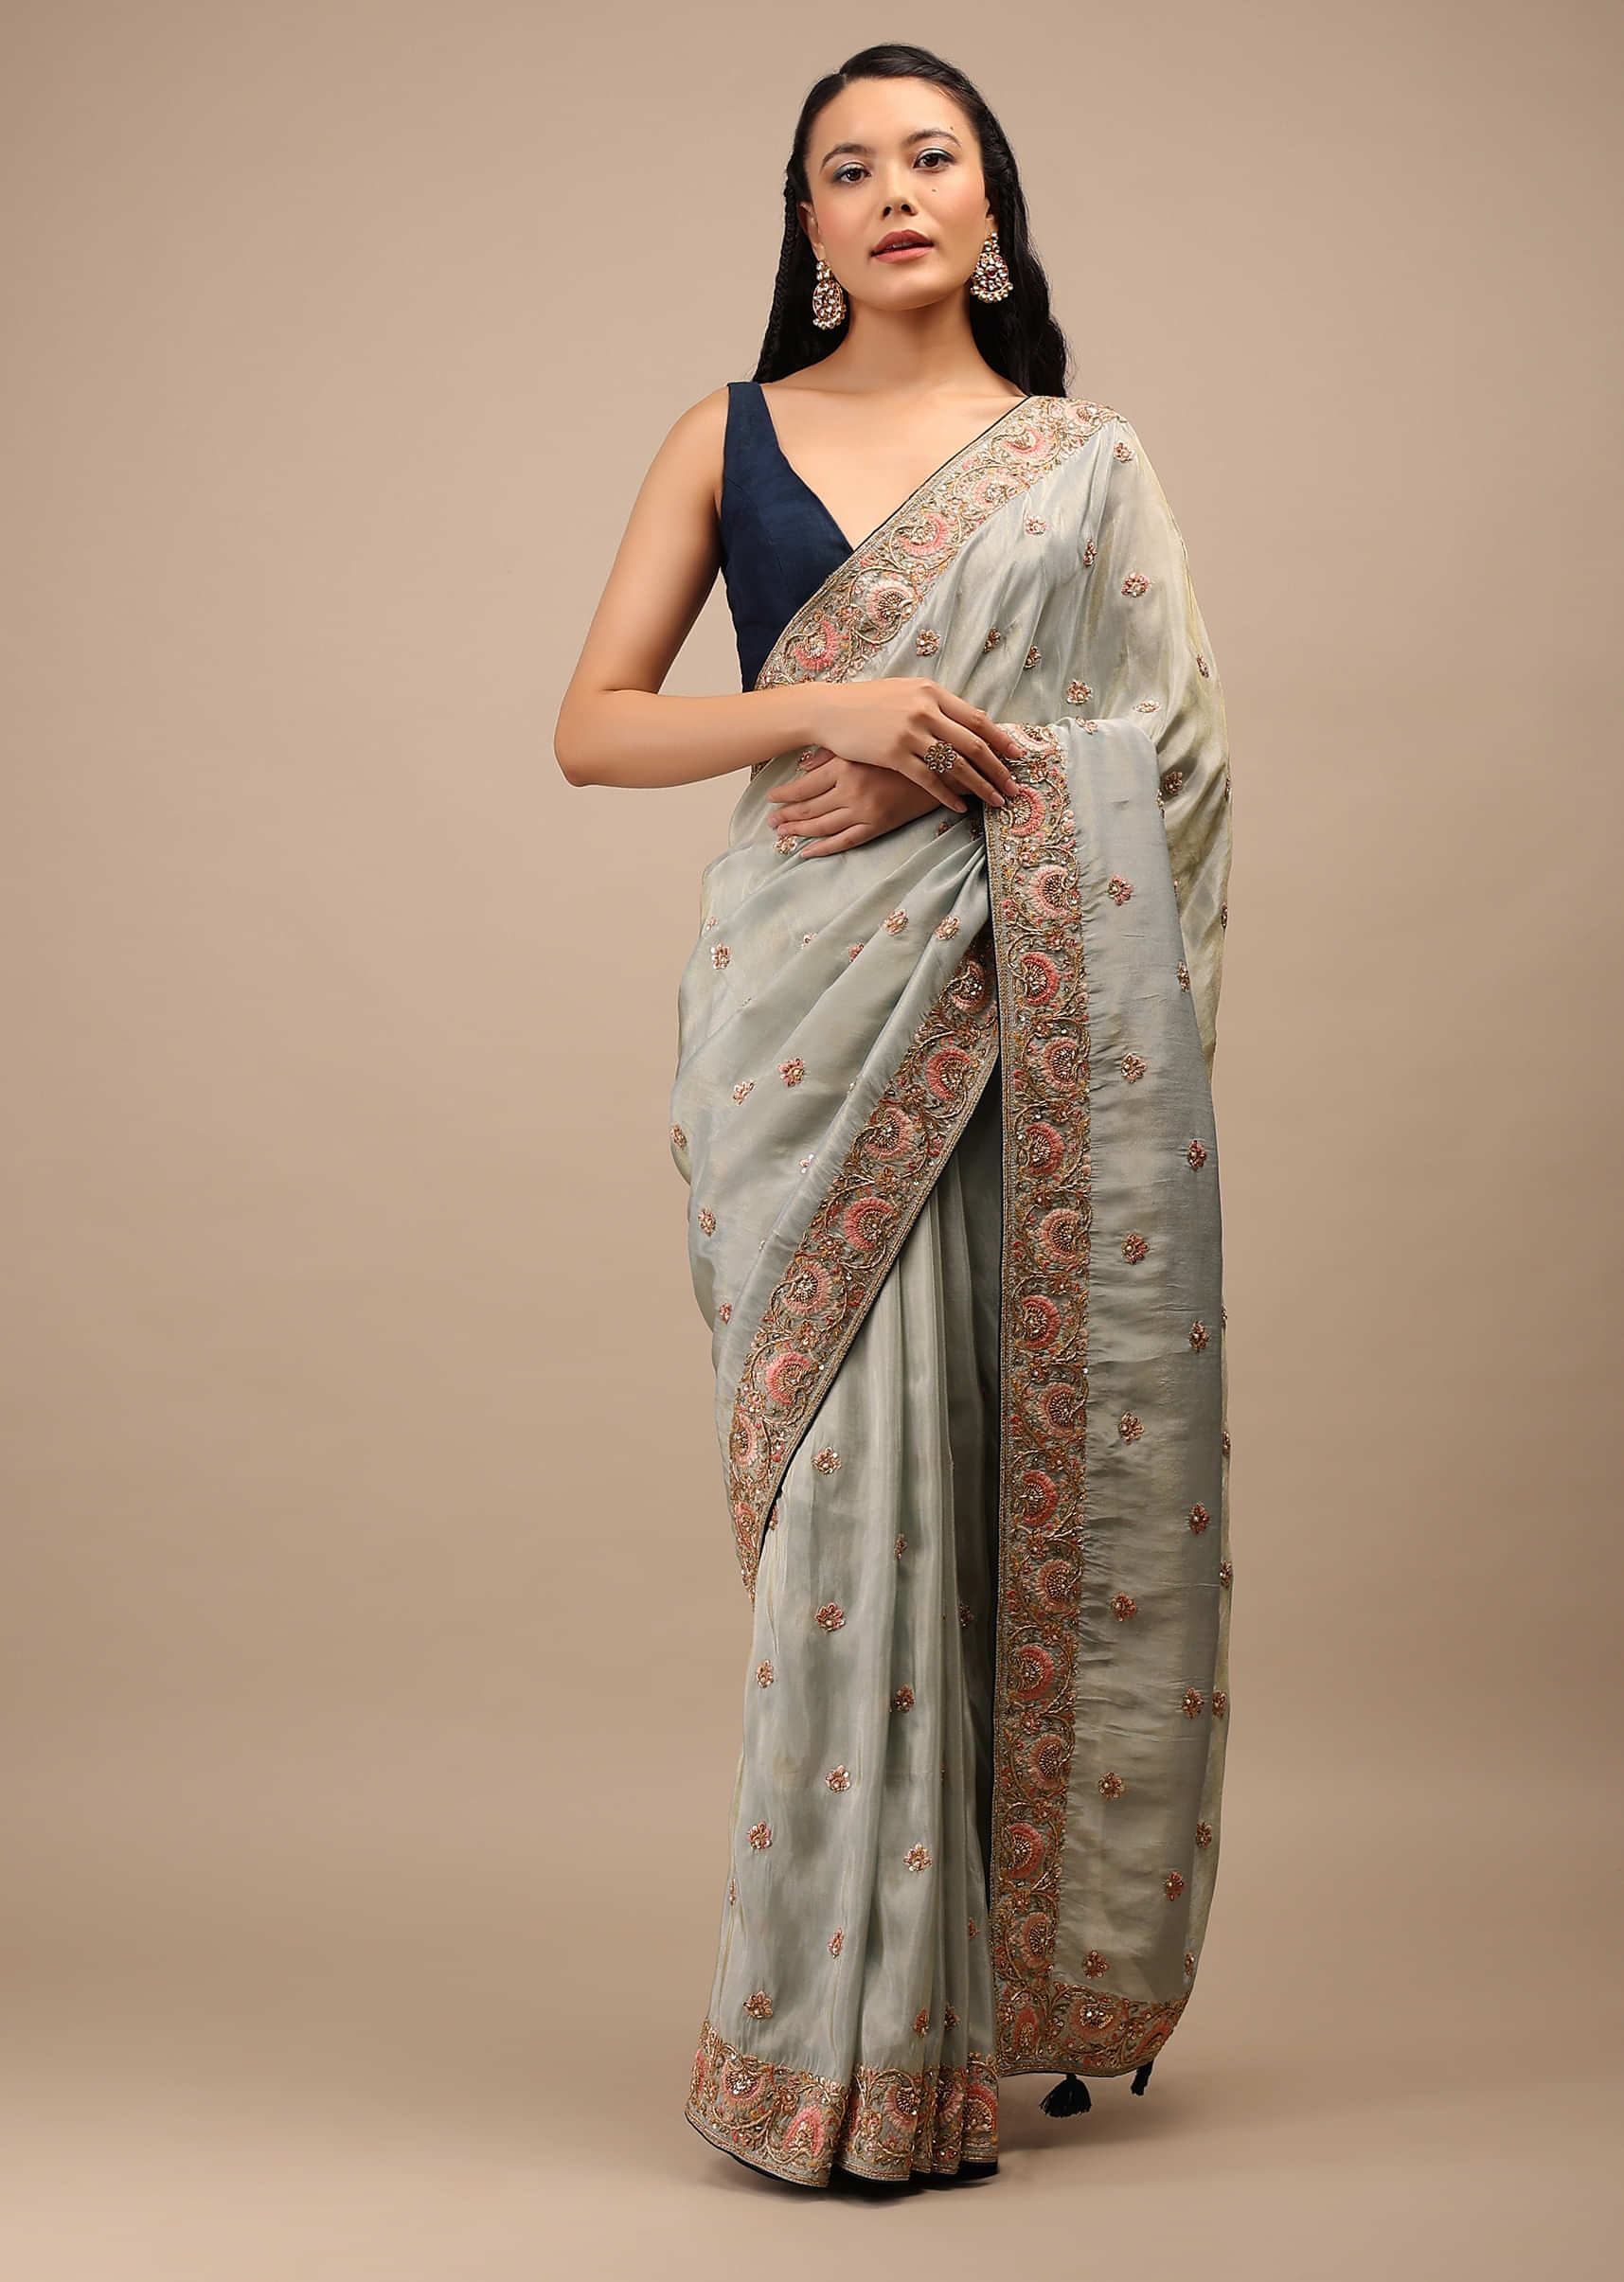 Sky Grey Tissue Saree In Resham Work And Moti Embroidery Floral Buttis, Floral Motifs Embroidery On The Border 